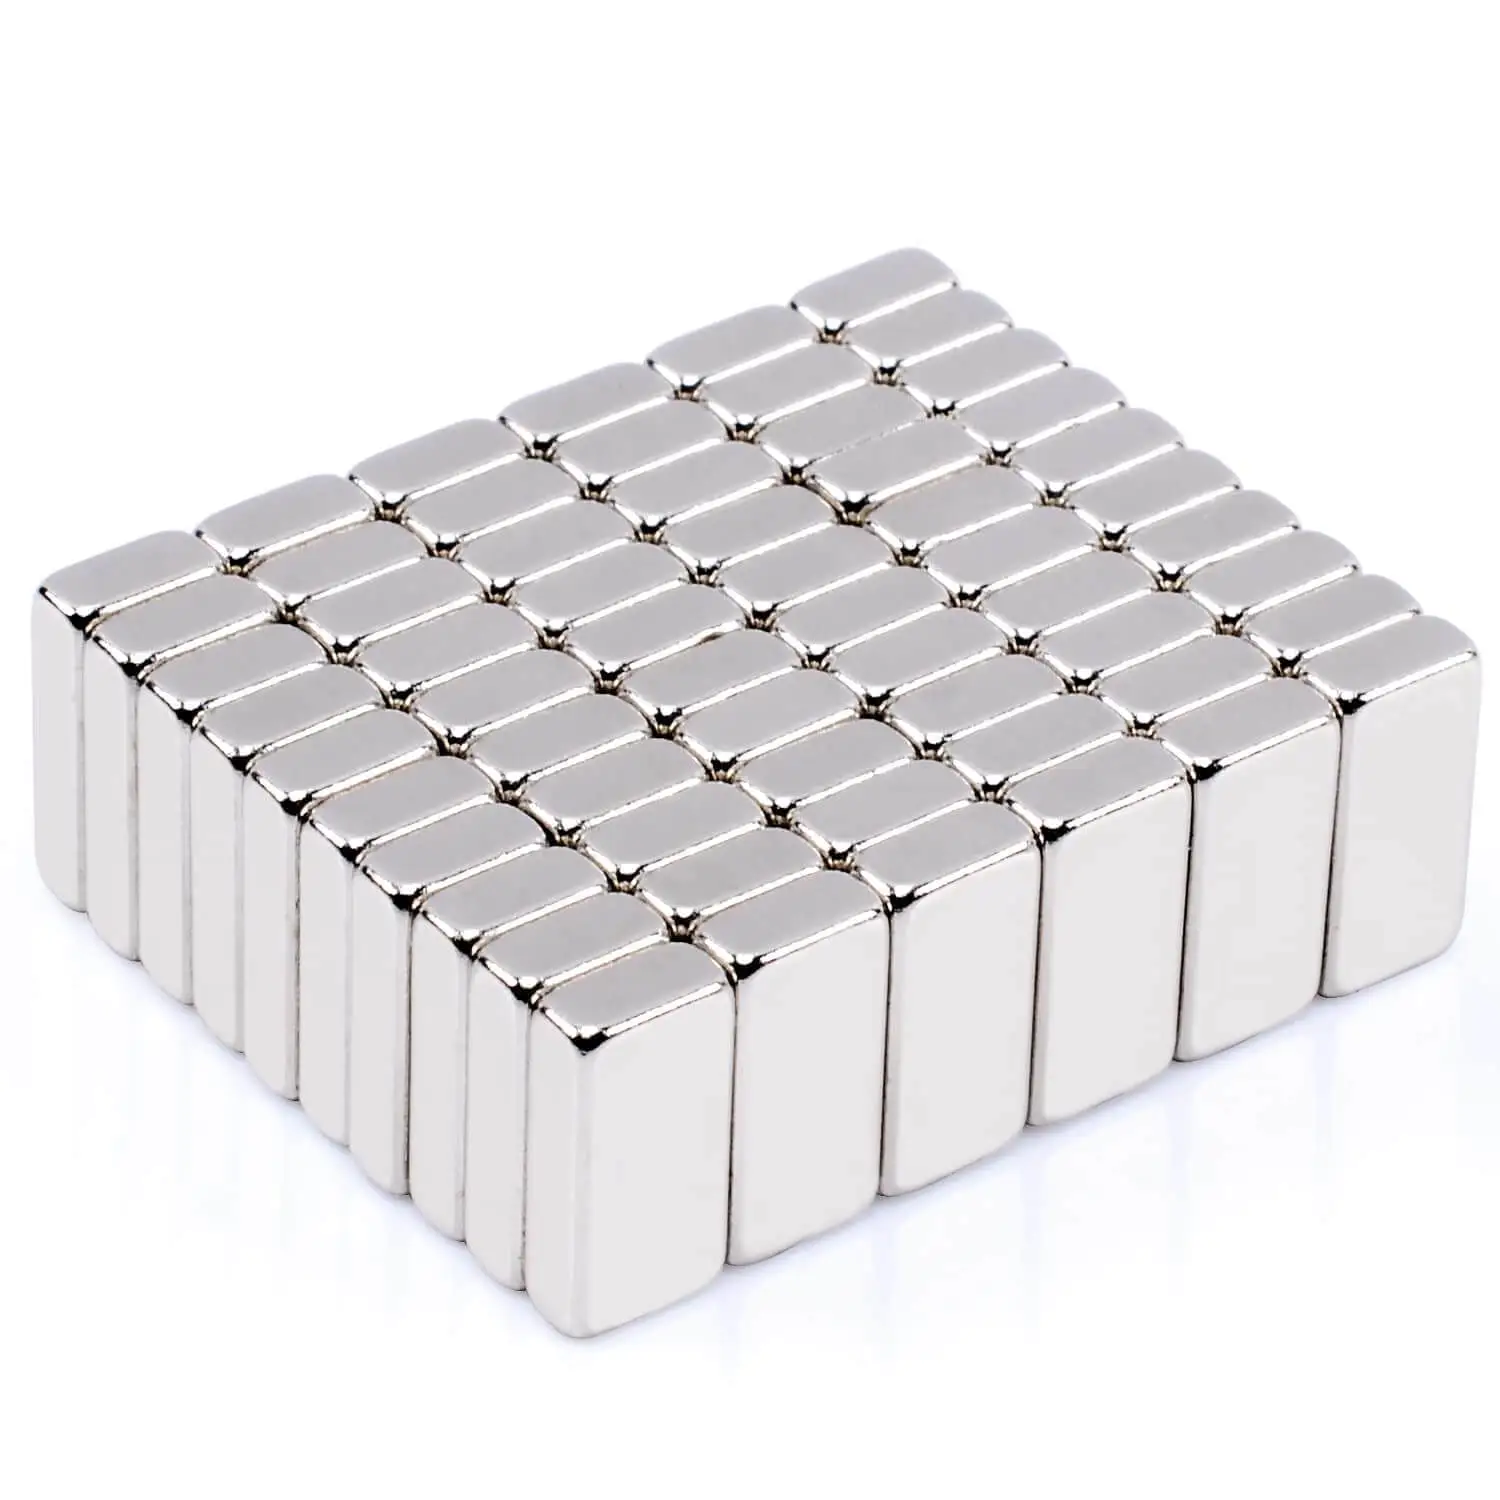 Super Strong Magnetic Neodymium N52 Large Square Thin Flat Powerful Permanent Magnet for Generator